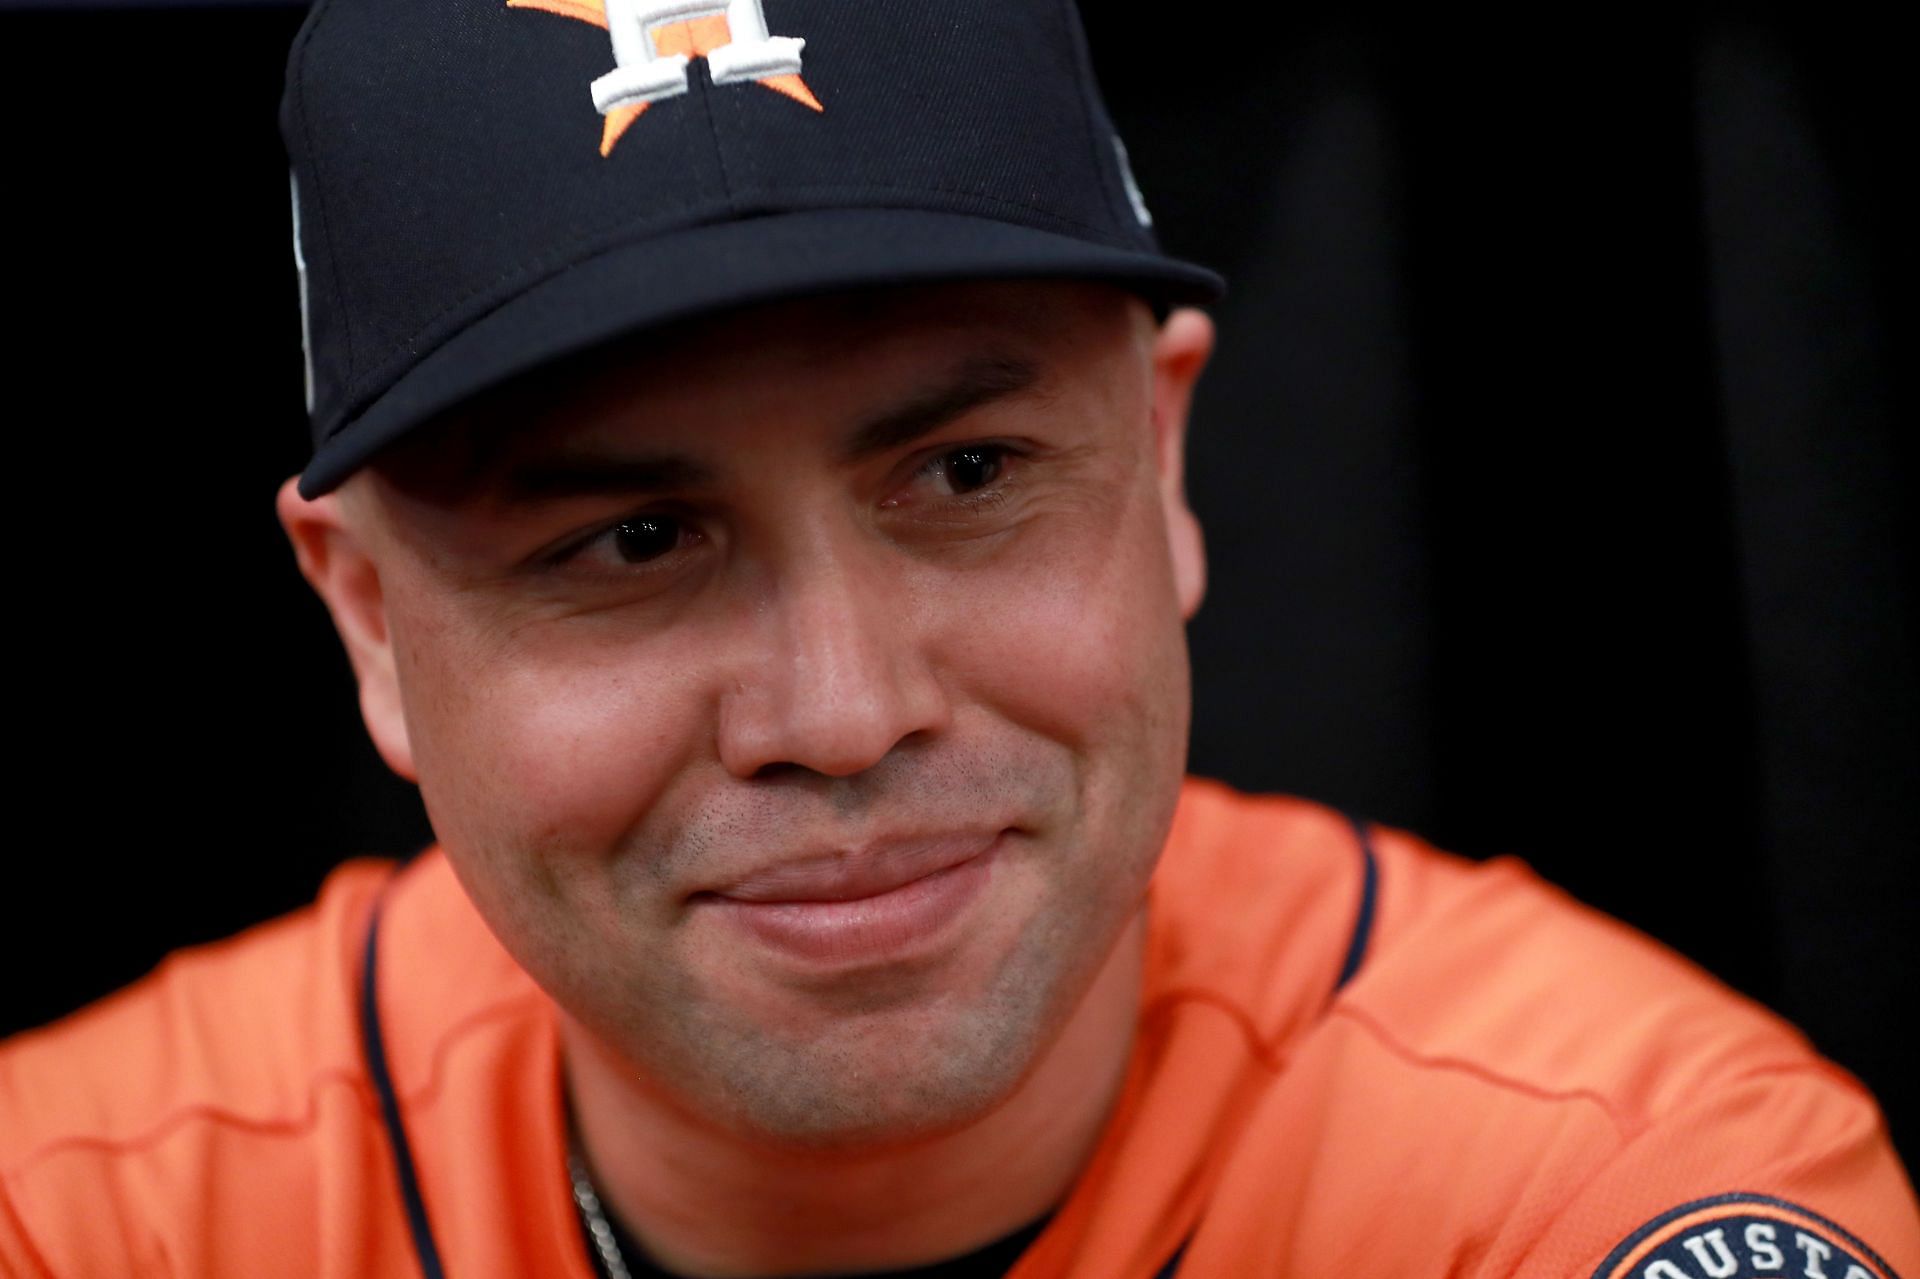 Two days after his glove's funeral, Carlos Beltran made a running